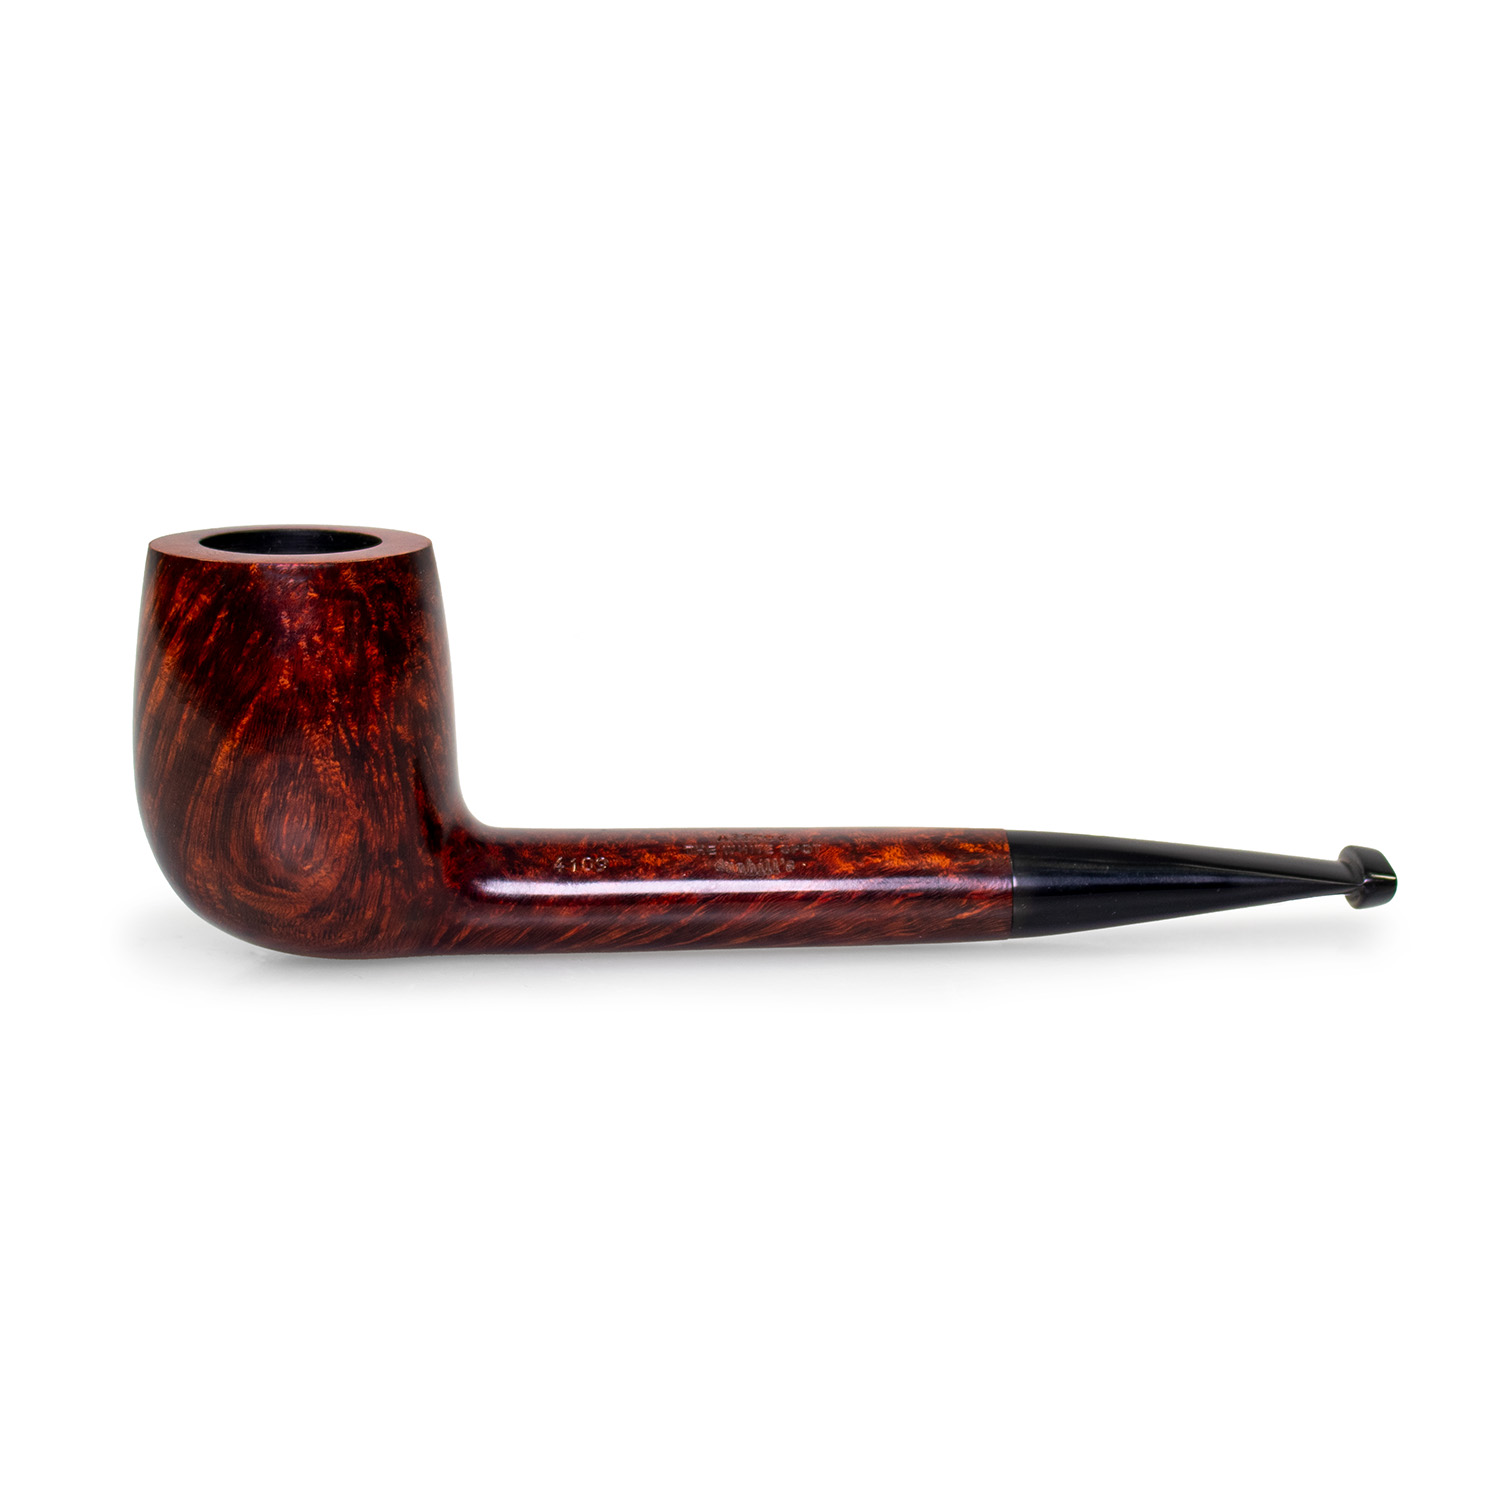 Dunhill Amber Root 4109